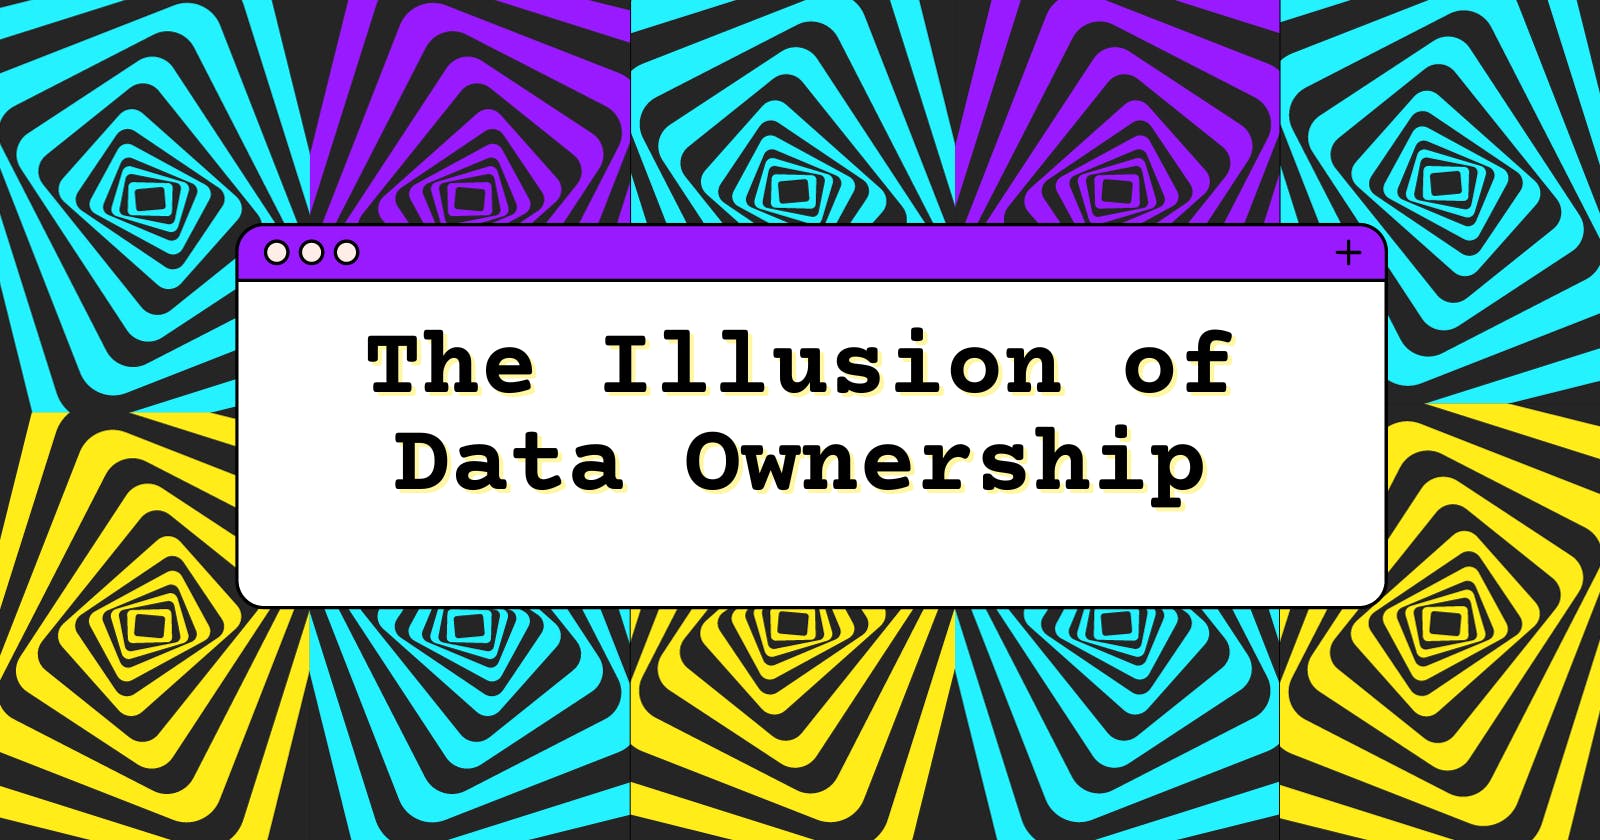 The Illusion of Data Ownership